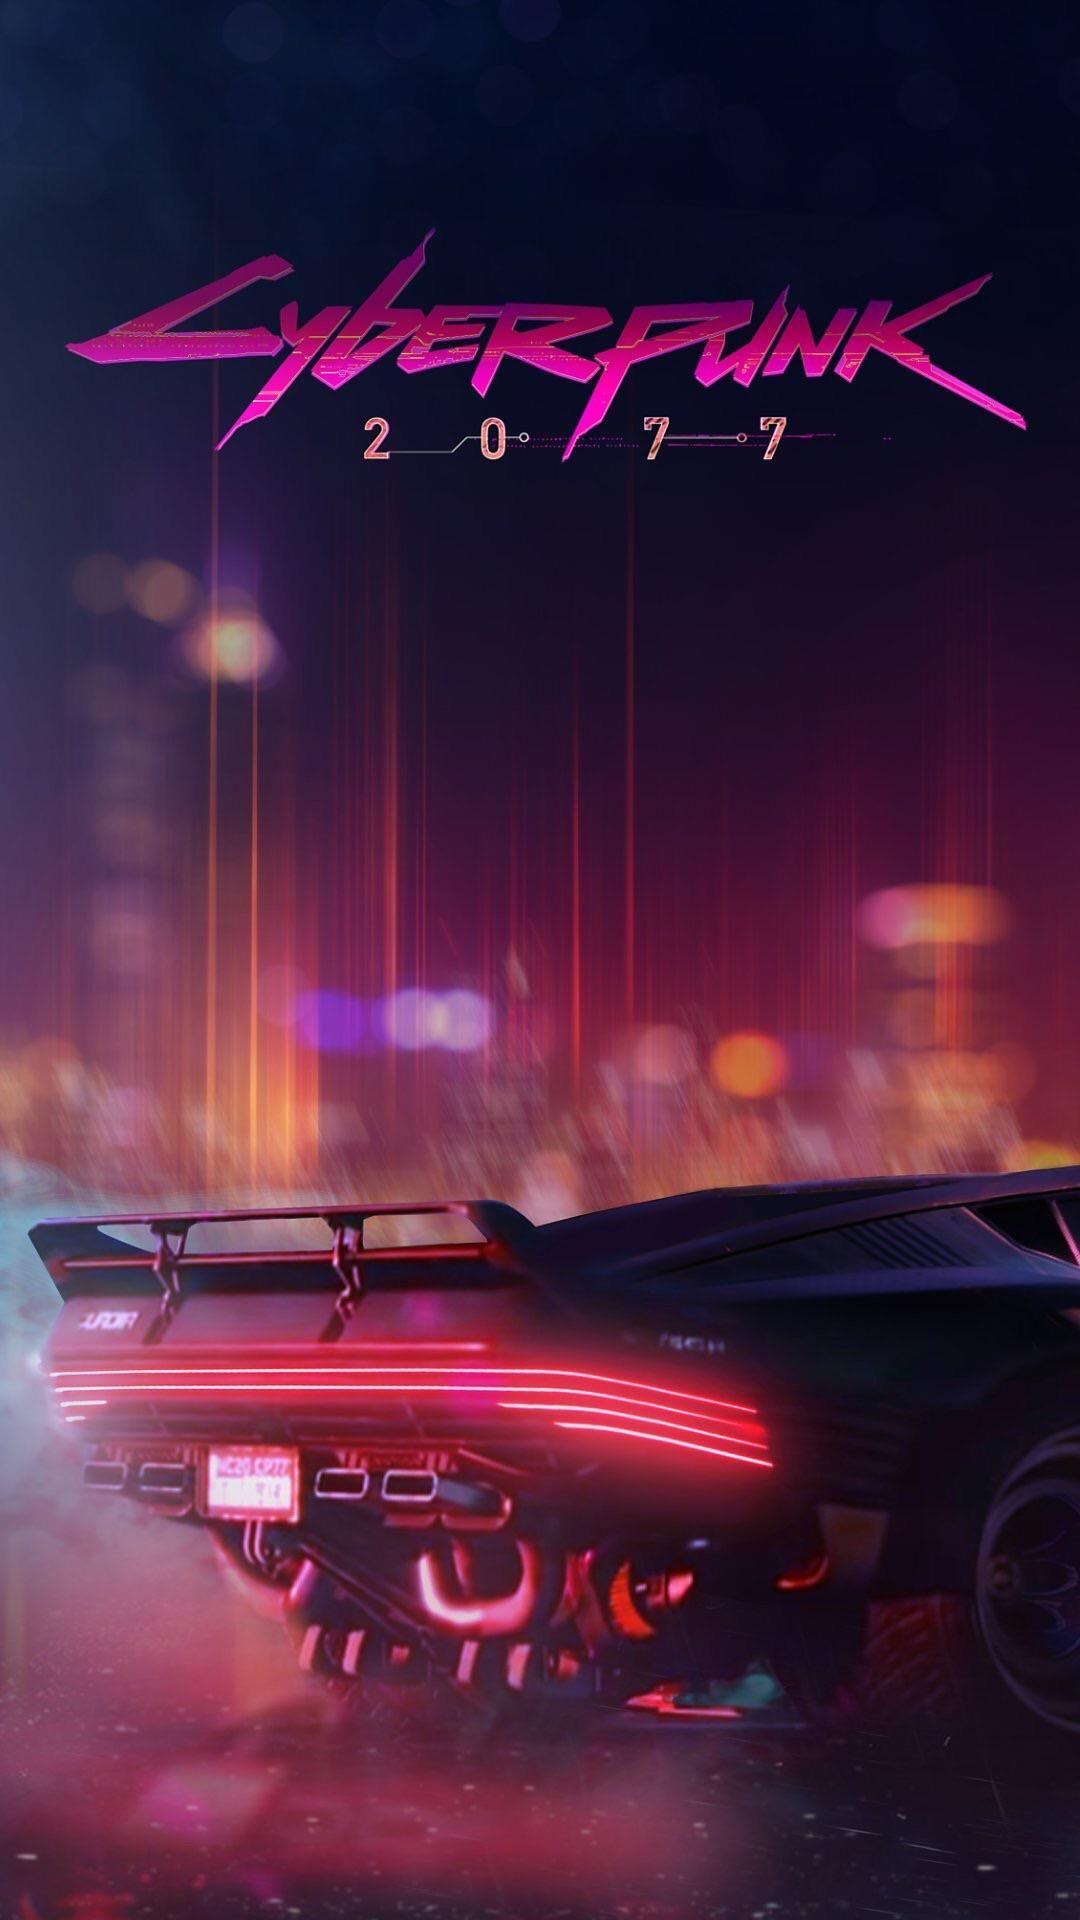 Cyberpunk 2077 Iphone Background - KoLPaPer - Awesome Free HD Wallpapers